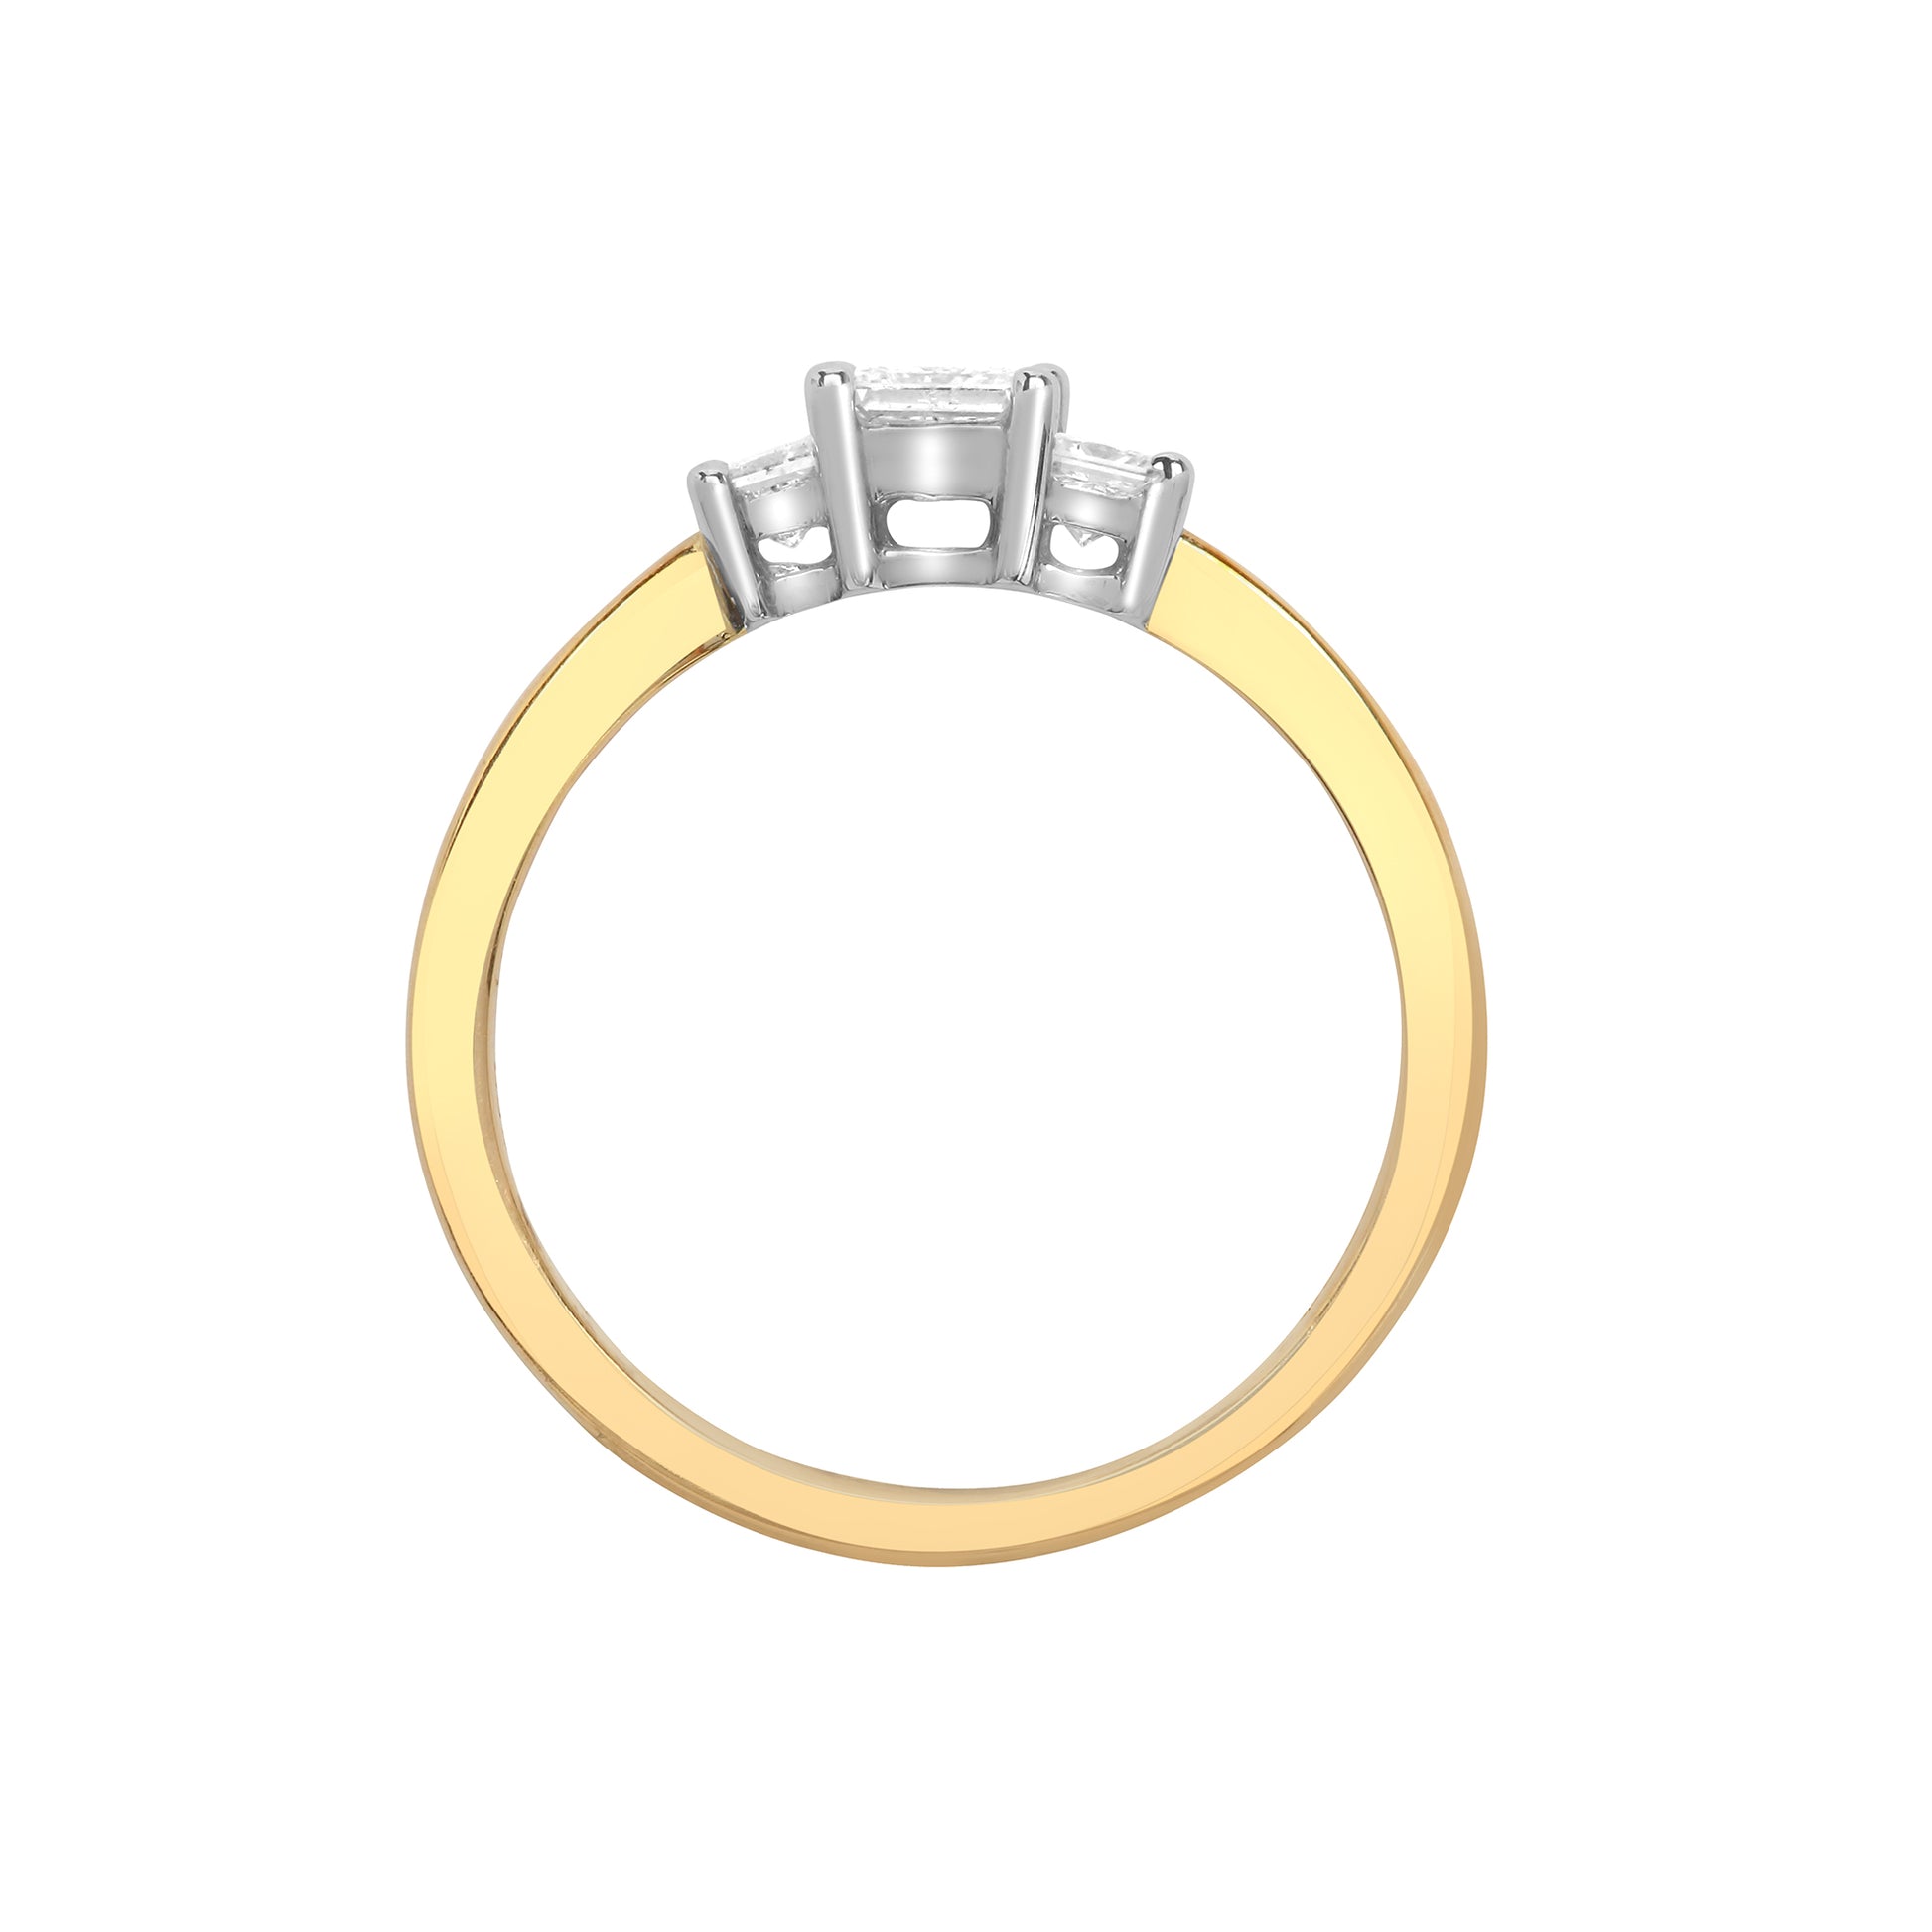 18ct Gold  1ct Diamond Trilogy Engagement Ring 5mm - 18R338-100